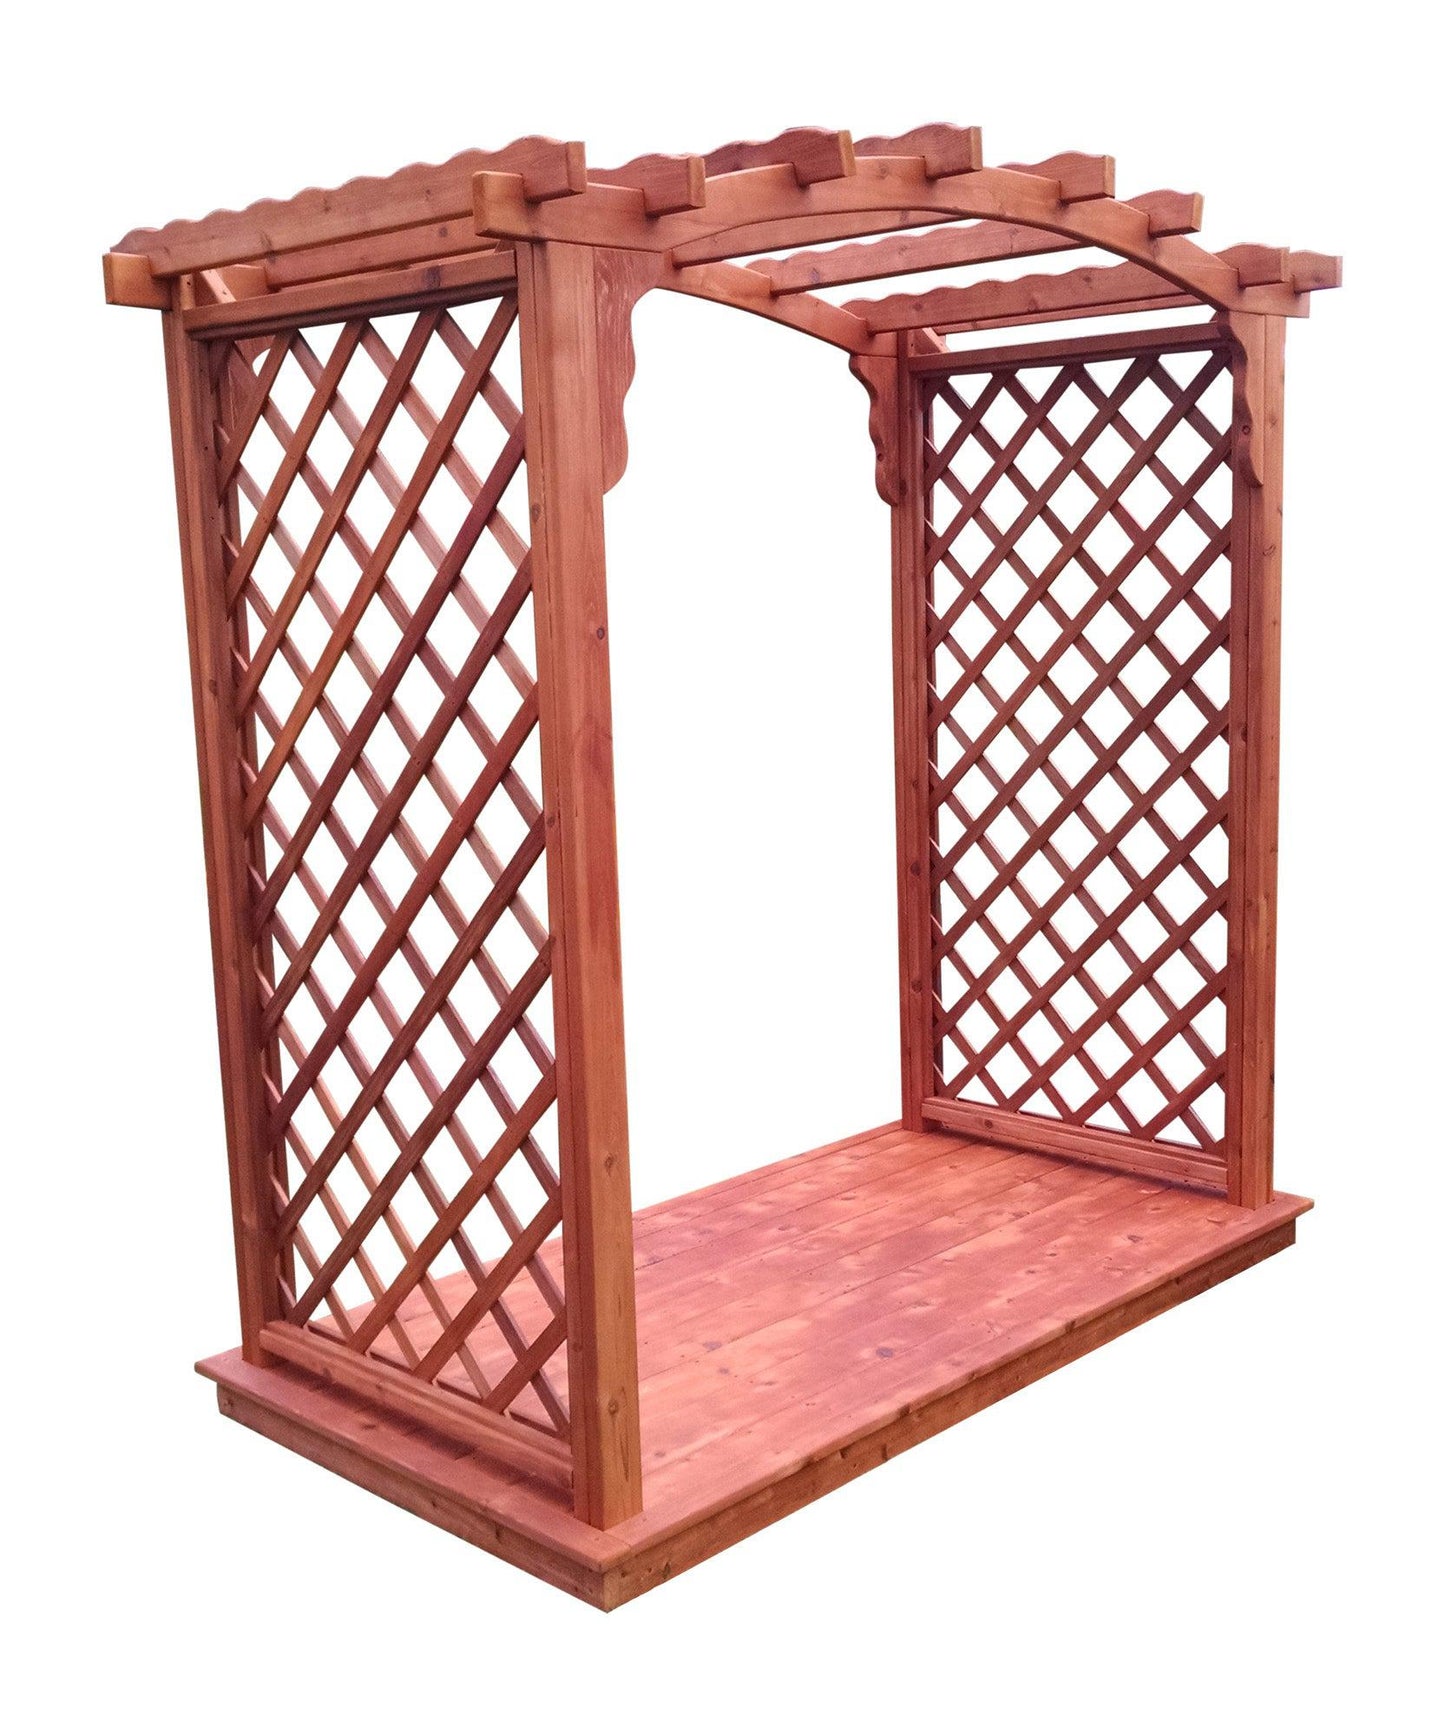 A&L Furniture Co. Western Red Cedar 6' Jamesport Arbor & Deck - LEAD TIME TO SHIP 4 WEEKS OR LESS